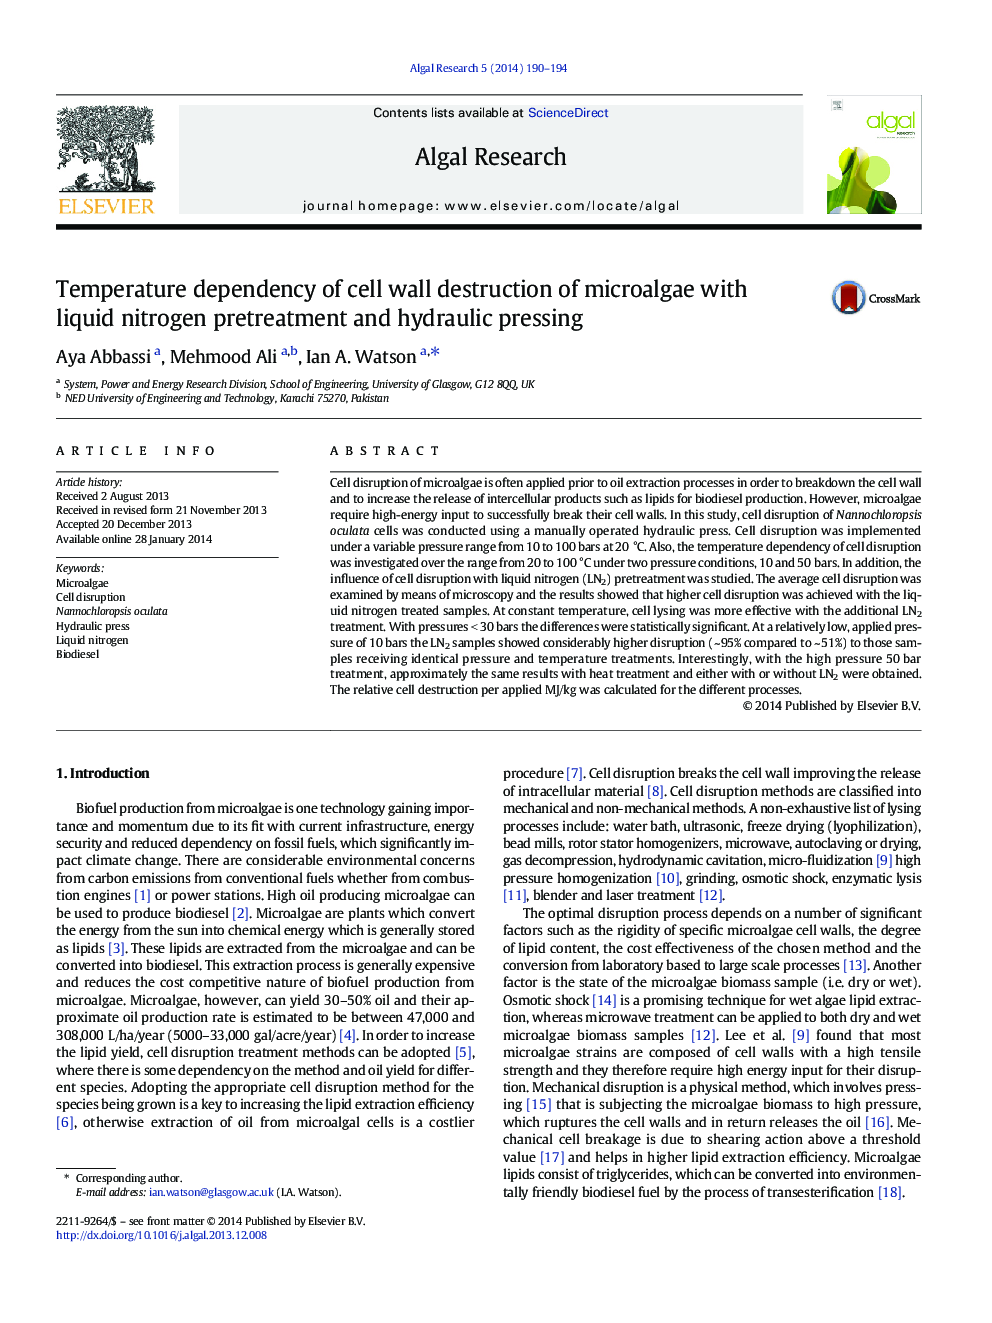 Temperature dependency of cell wall destruction of microalgae with liquid nitrogen pretreatment and hydraulic pressing